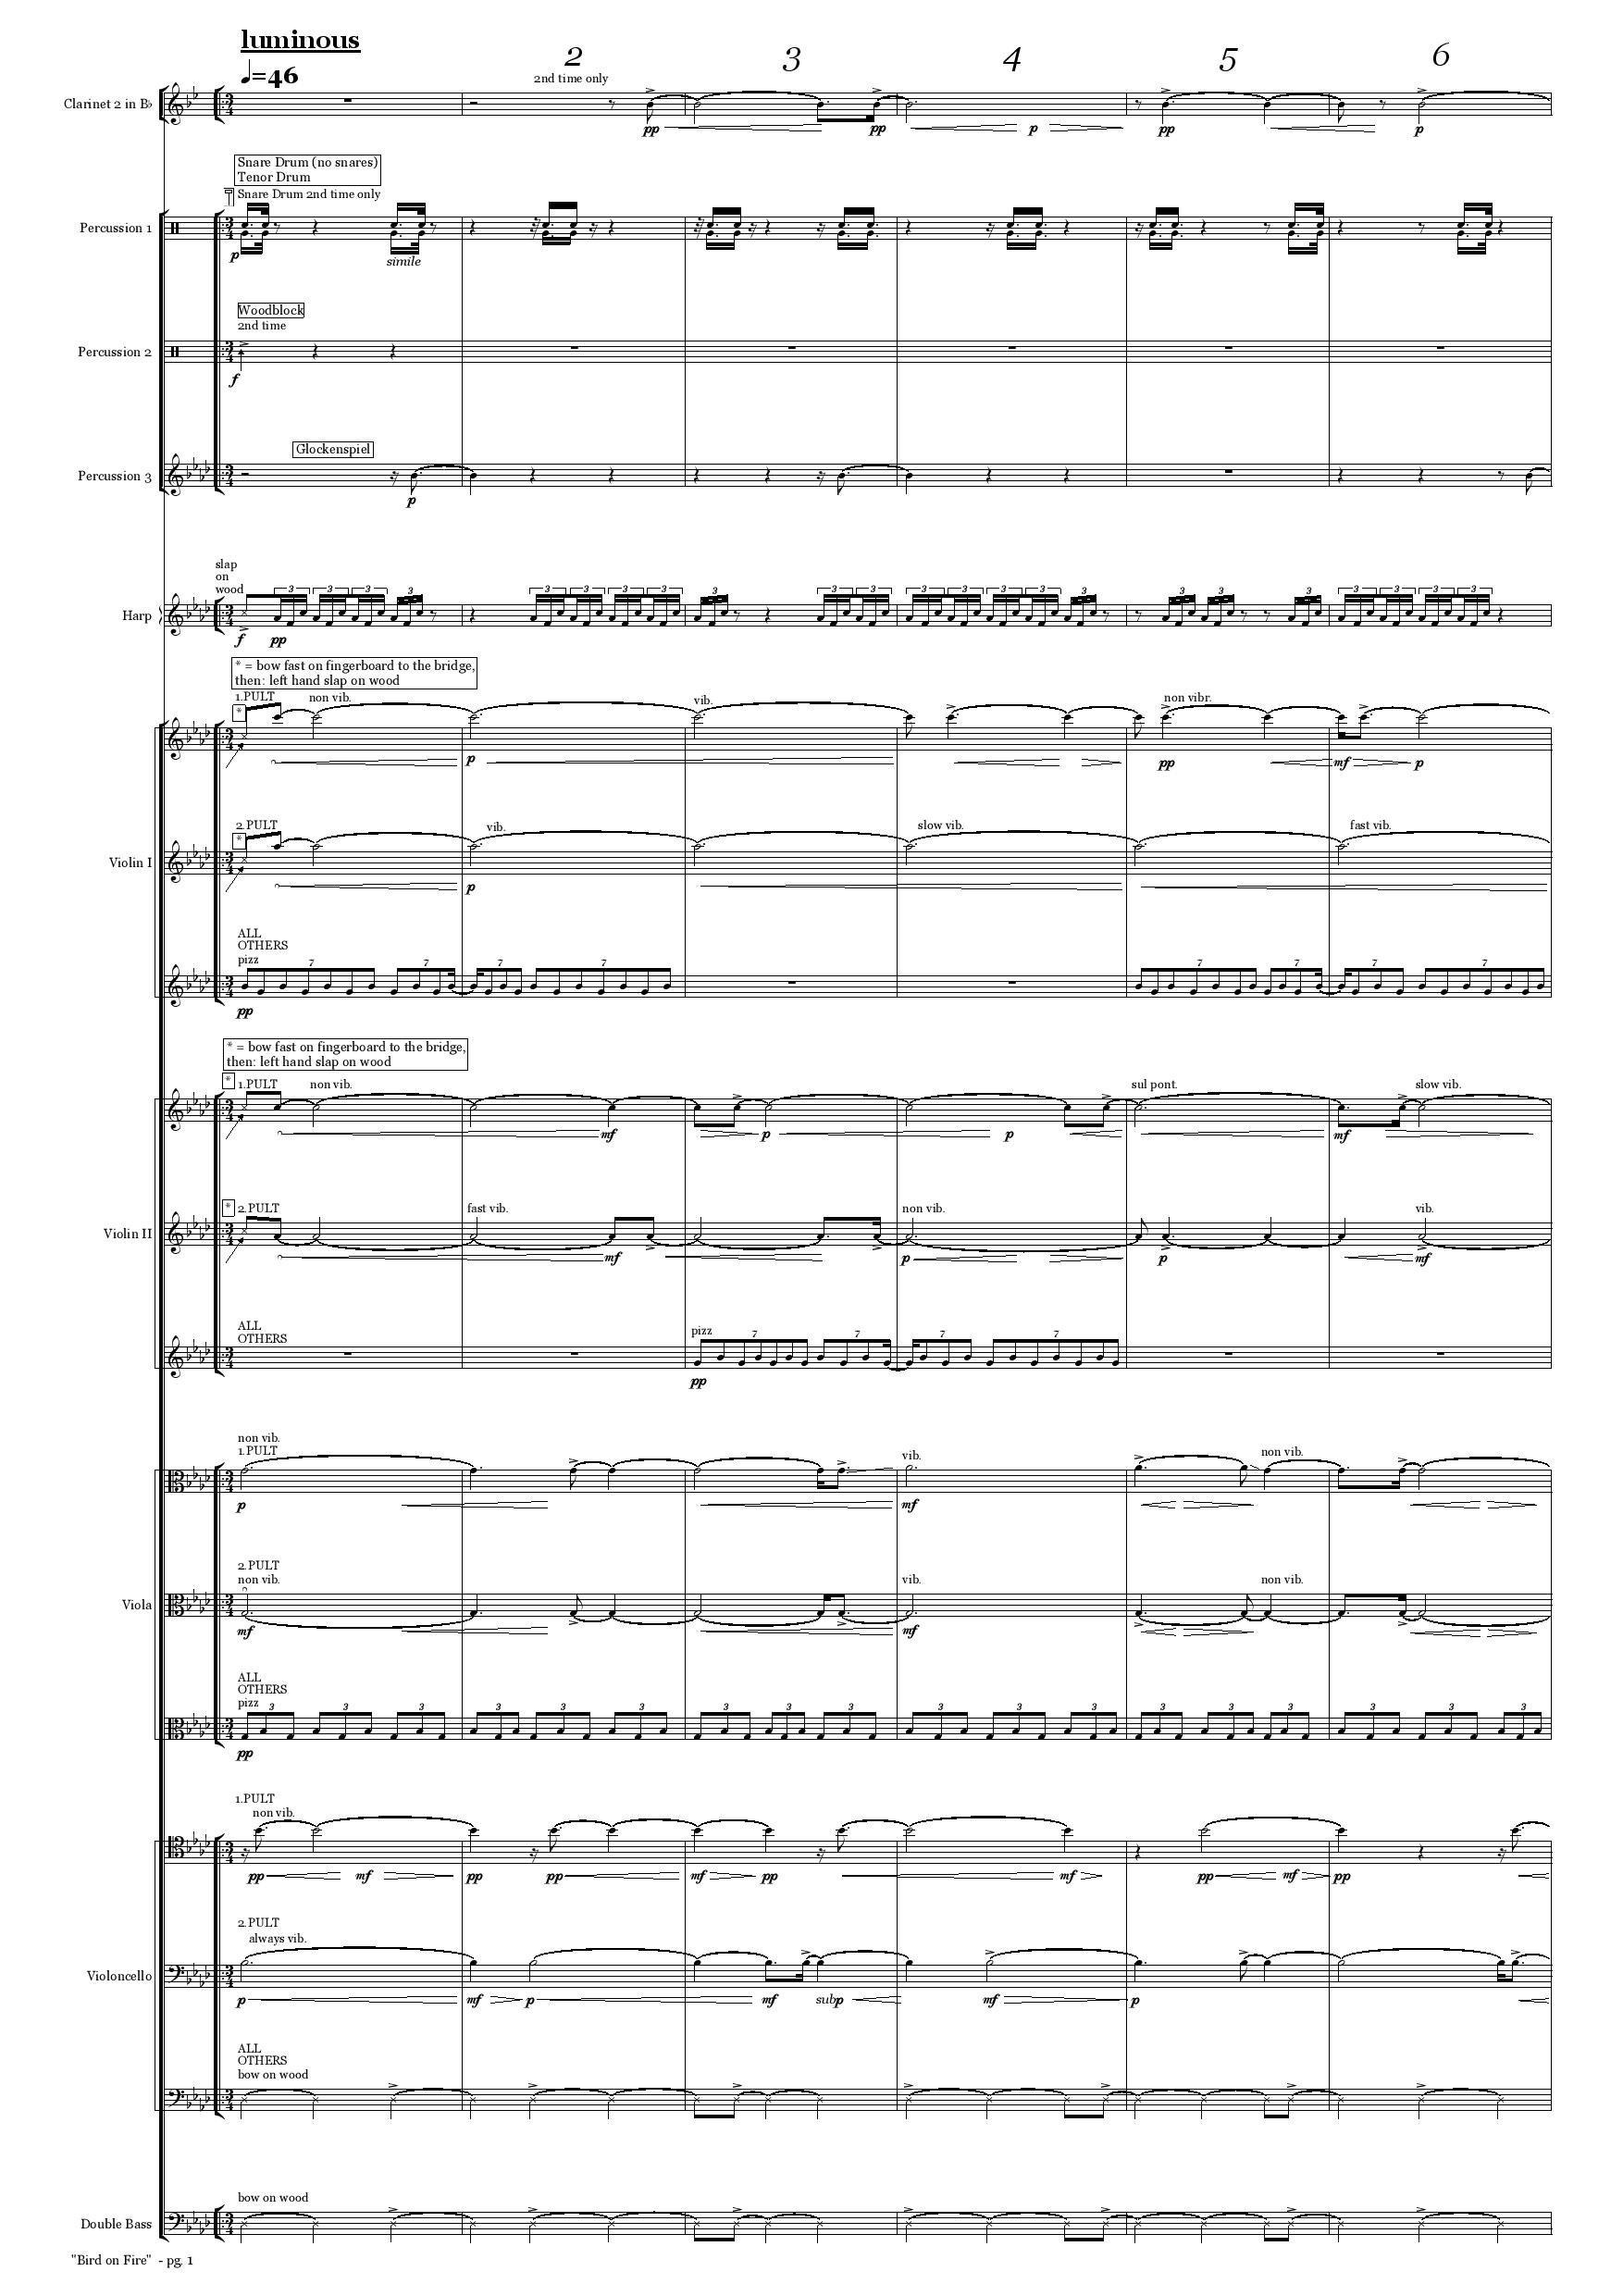 Copy of SCORE EXCERPTS (to request full score, please send an email)